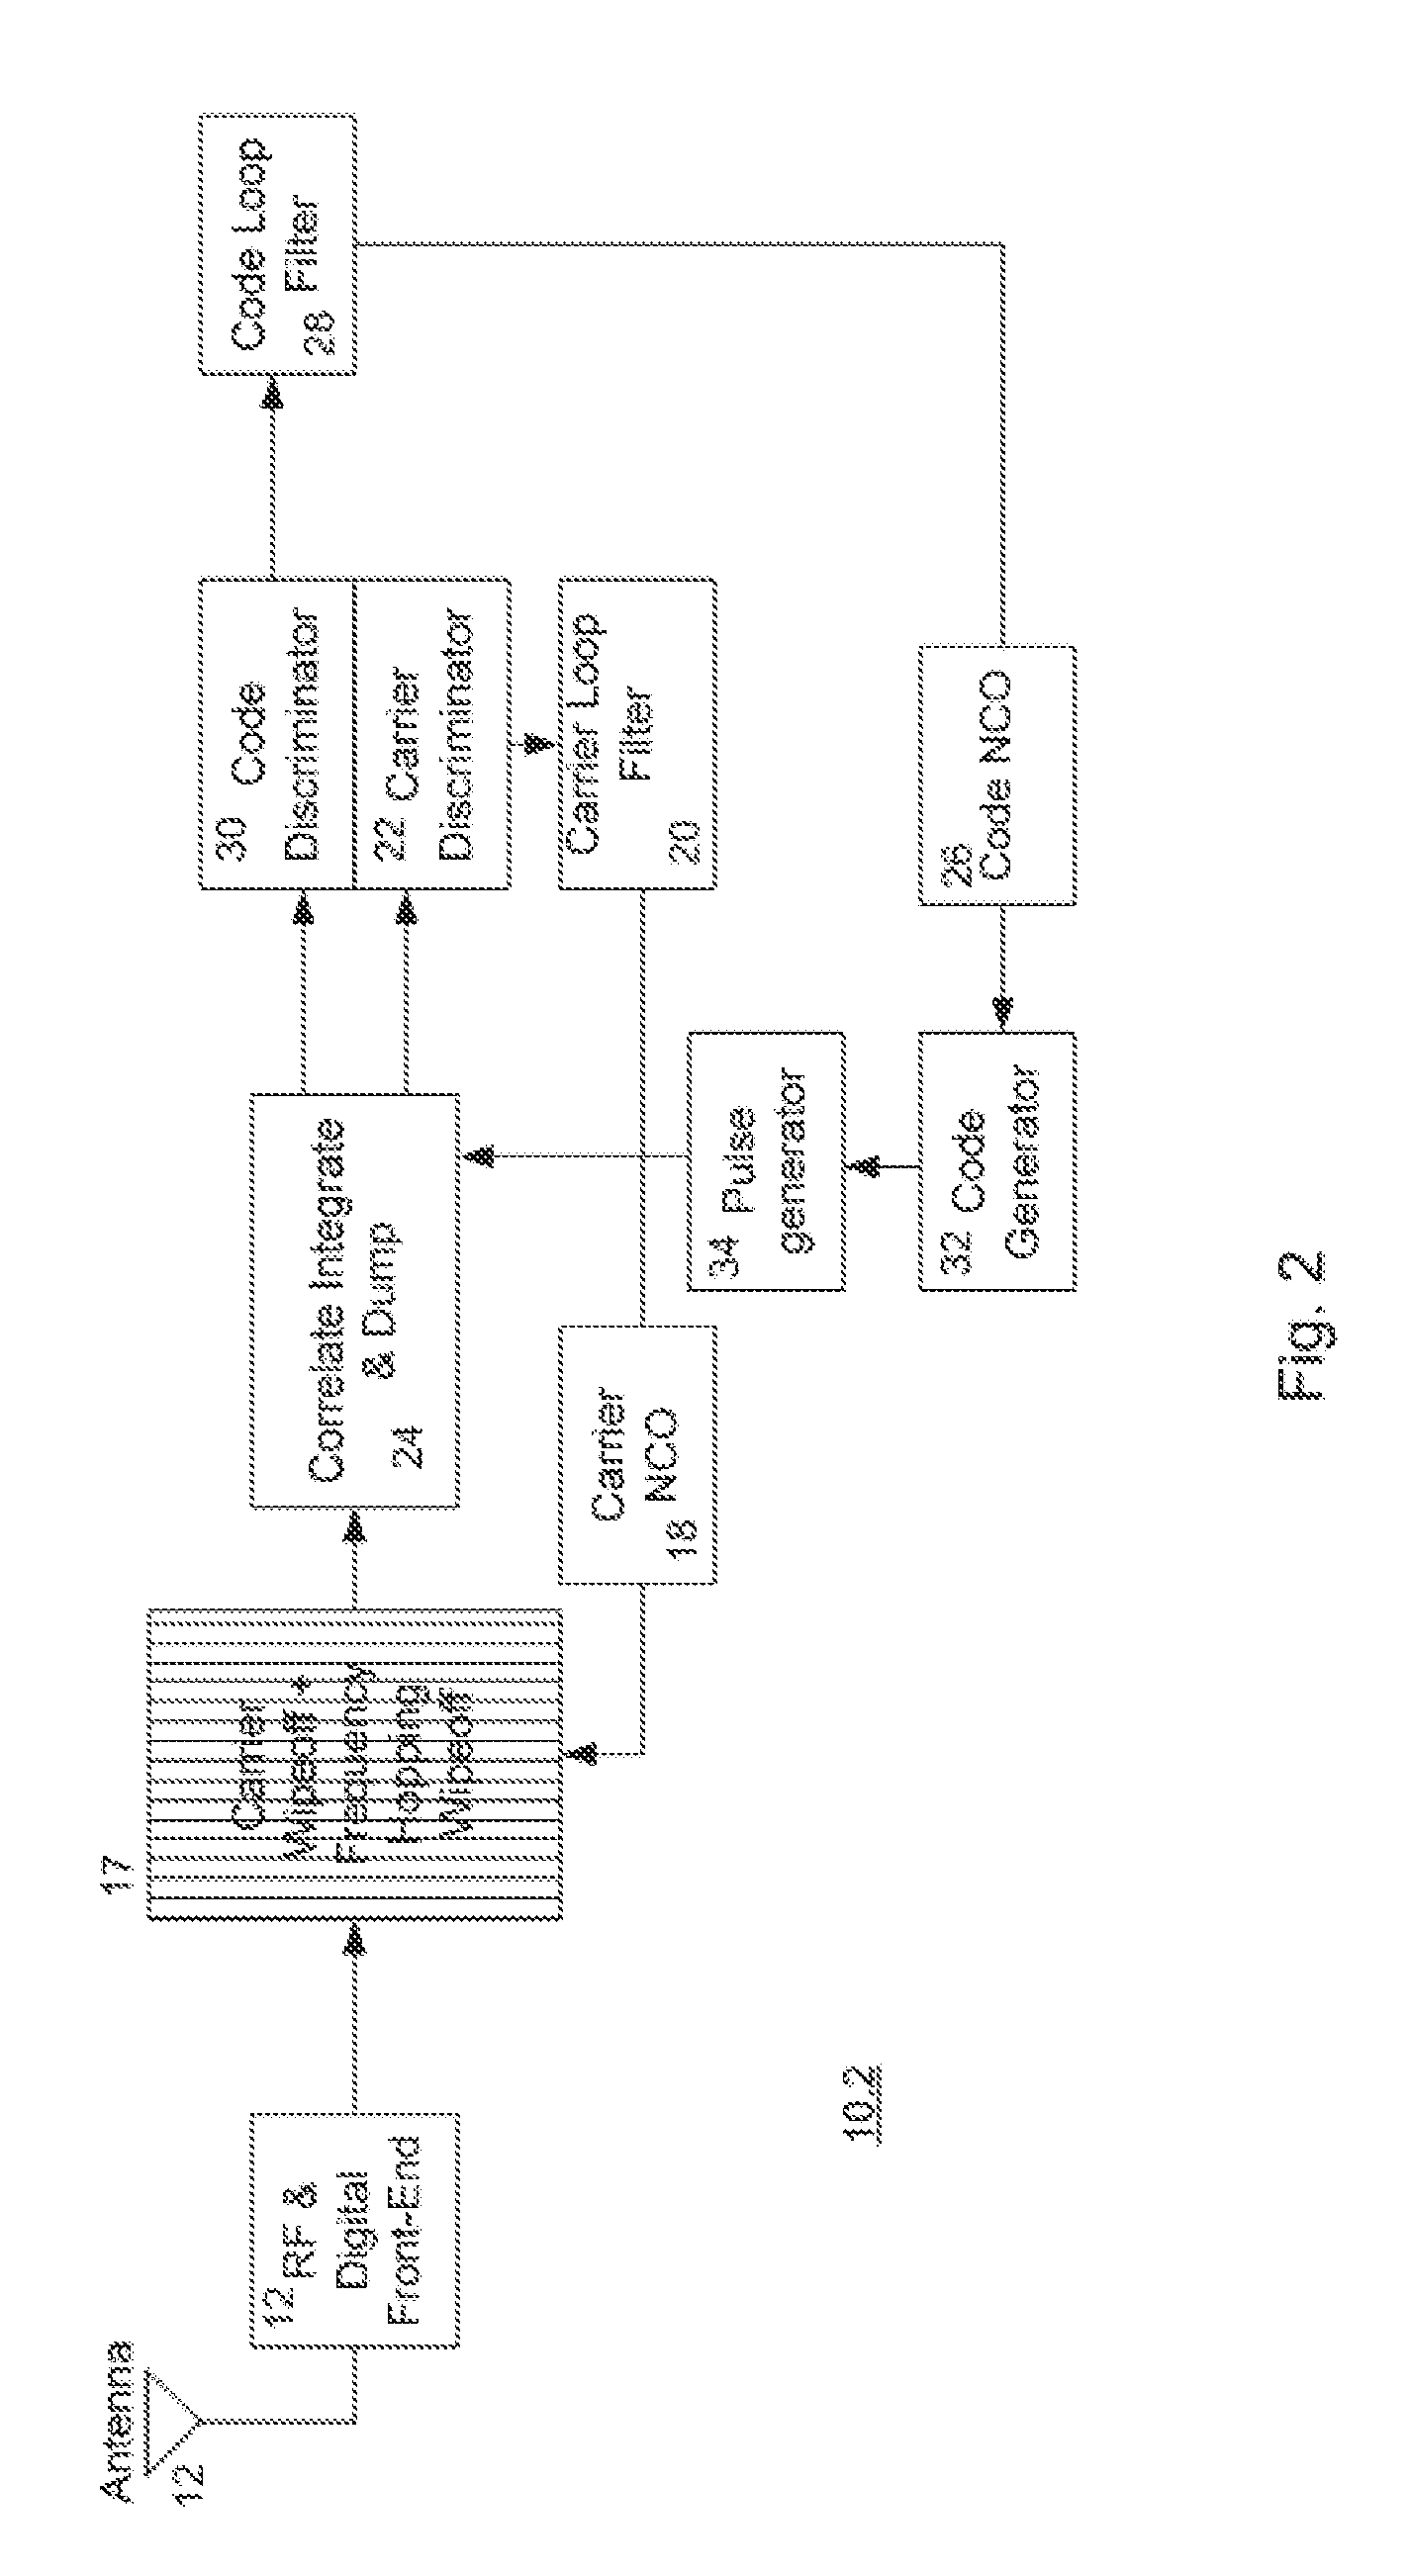 Receiver for acquiring and tracking spread spectrum navigation signals with changing subcarriers